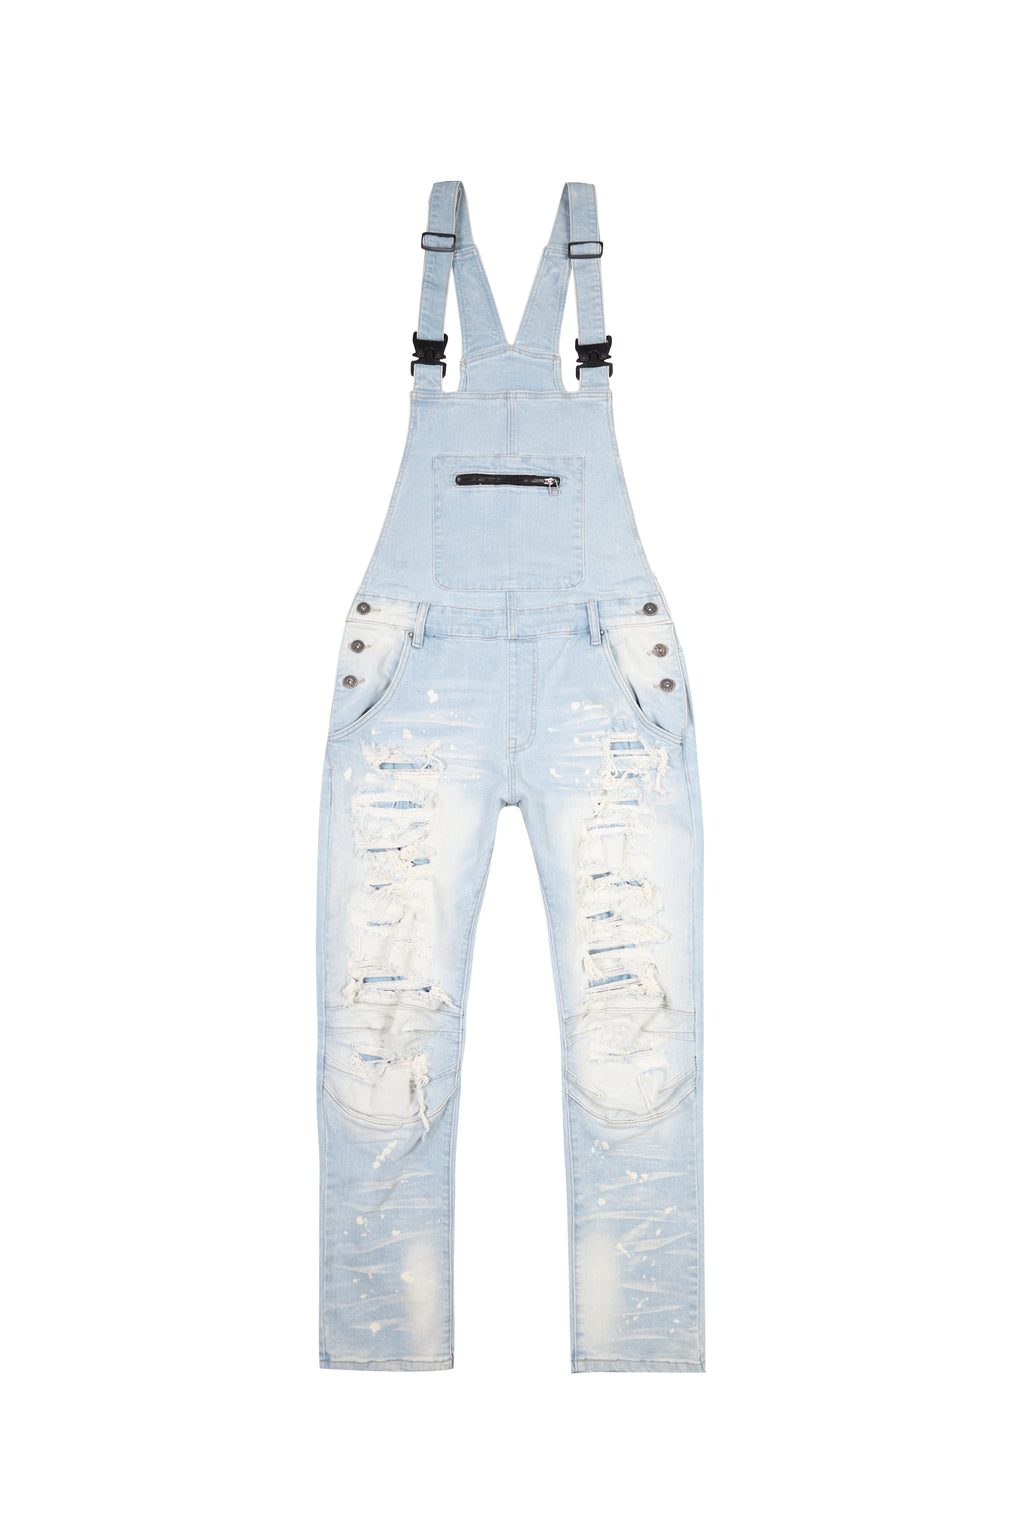 Rip & Repair Fashion Overall Speckle Blue - Smoke Rise